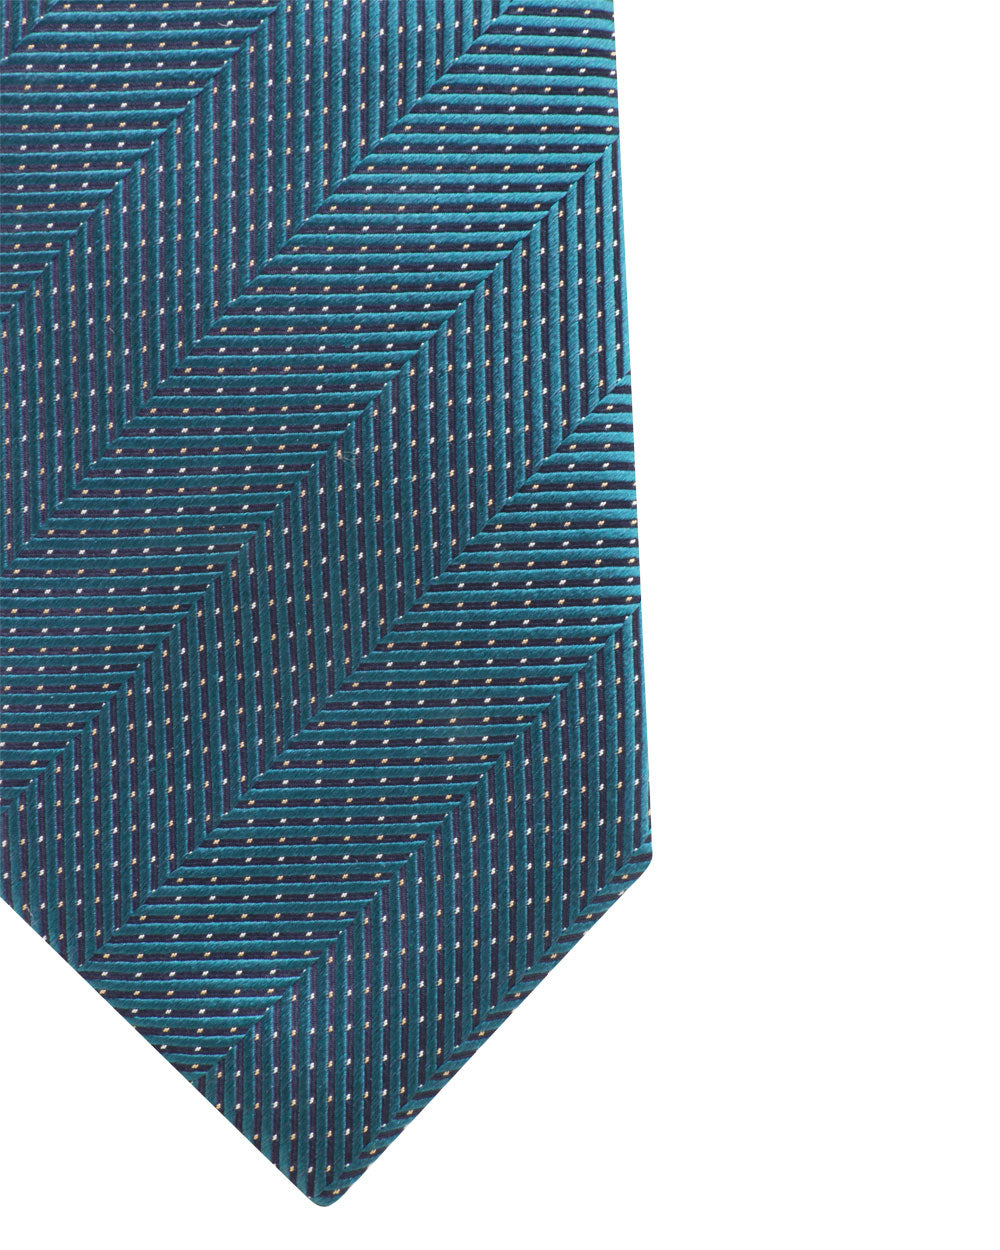 Teal and Midnight Micro Patterned Striped Tie